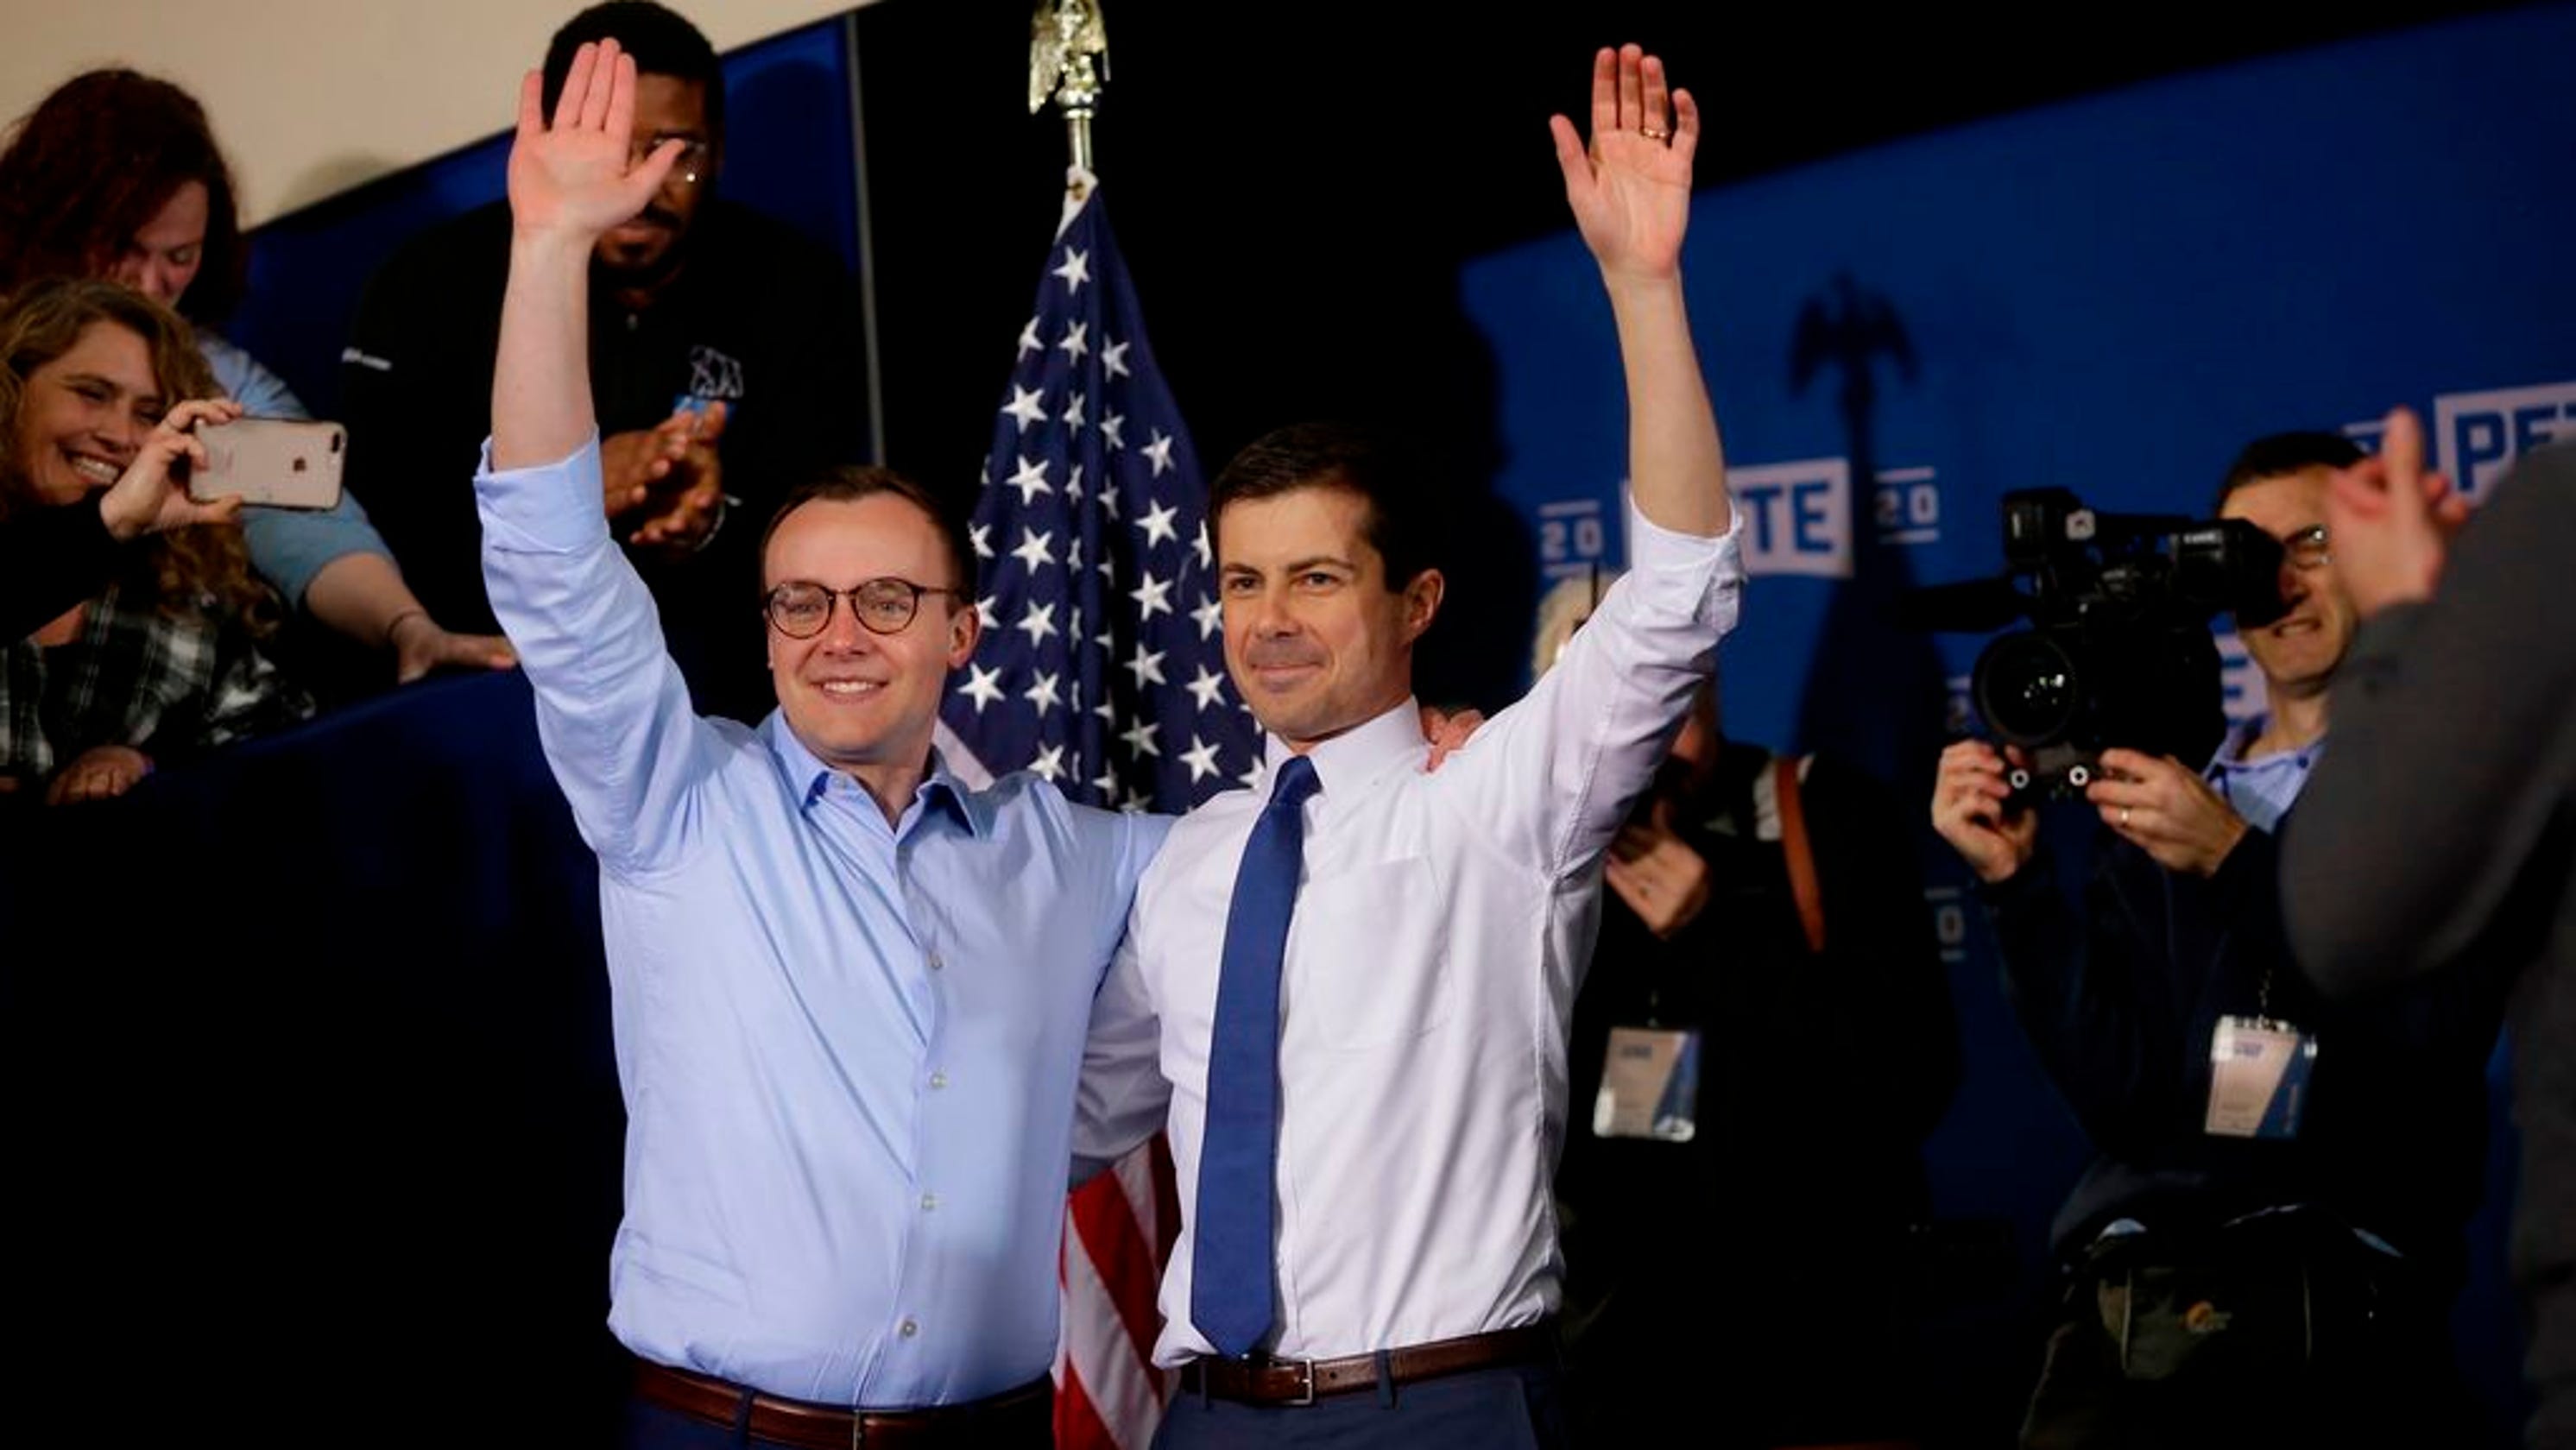 Chasten Buttigieg weighs in after Trump aide defended Pence's record2984 x 1680